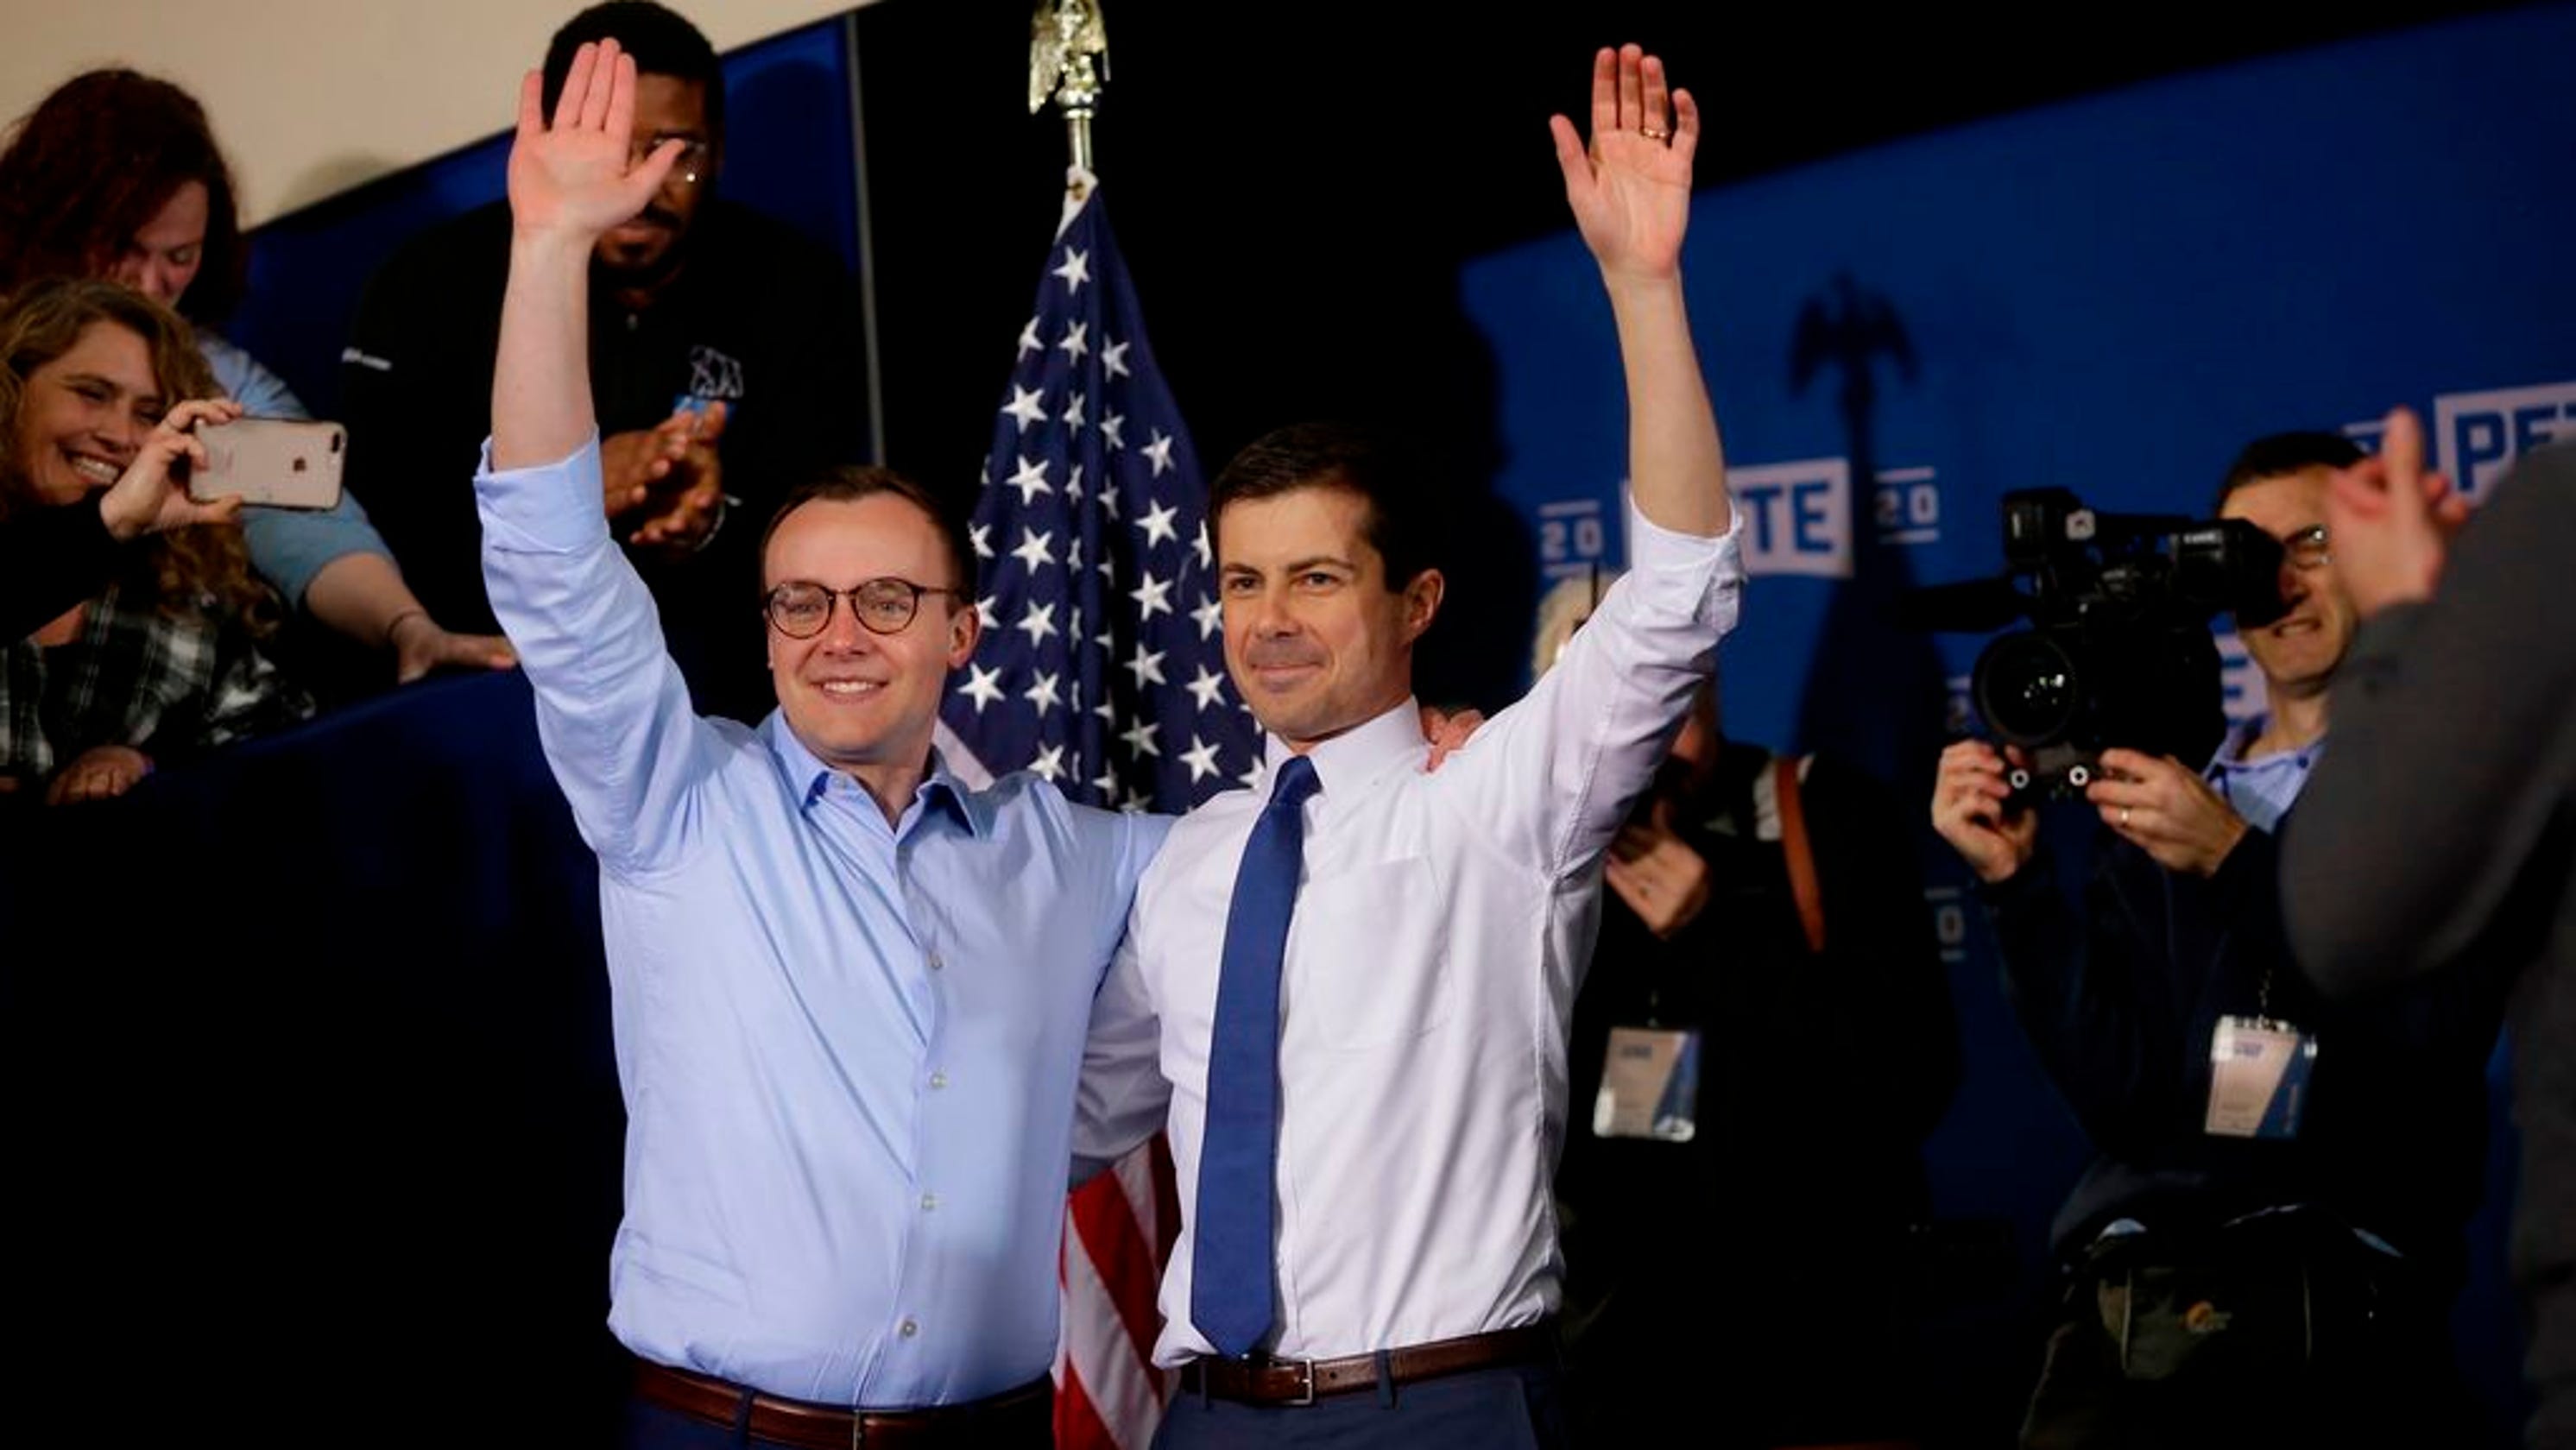 Chasten Buttigieg weighs in after Trump aide defended Pence's record2984 x 1680